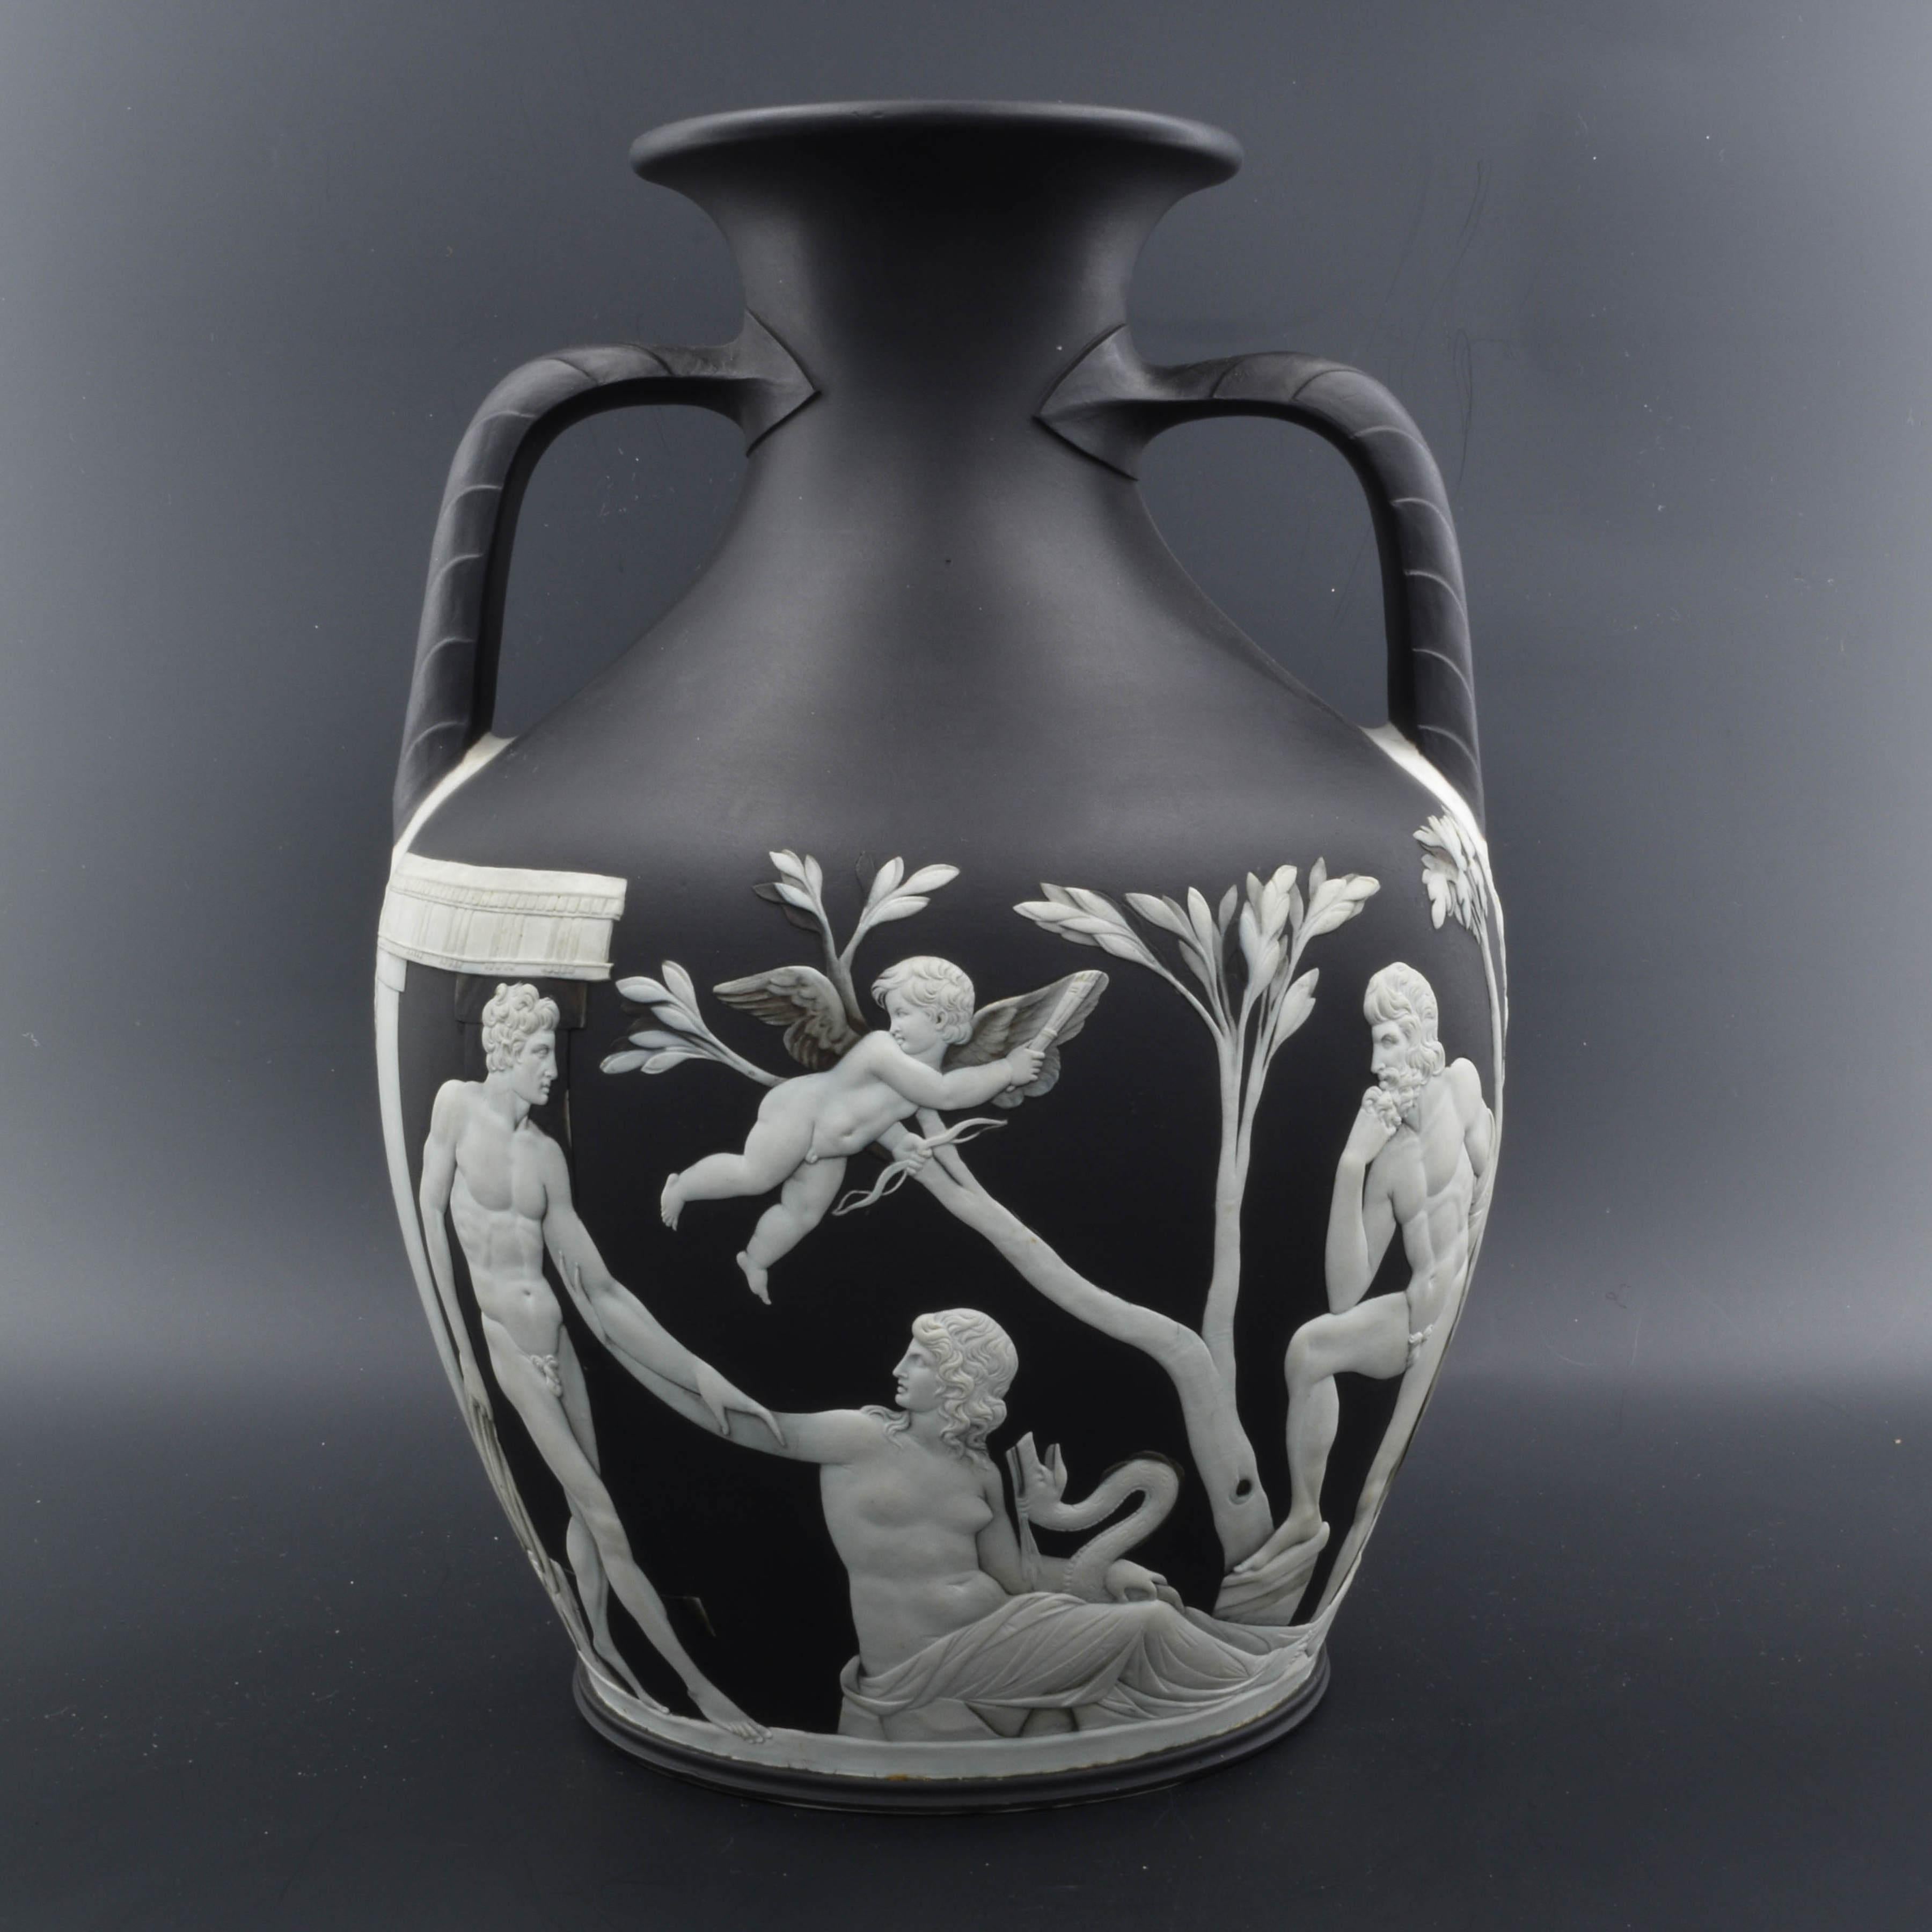 NOTE: We do not keep this in the showroom. Please let us know if you're visiting and would like to see it.

Rarely does a first edition Portland vase come onto the market, and even more rarely such a perfect example.

The model for this is the